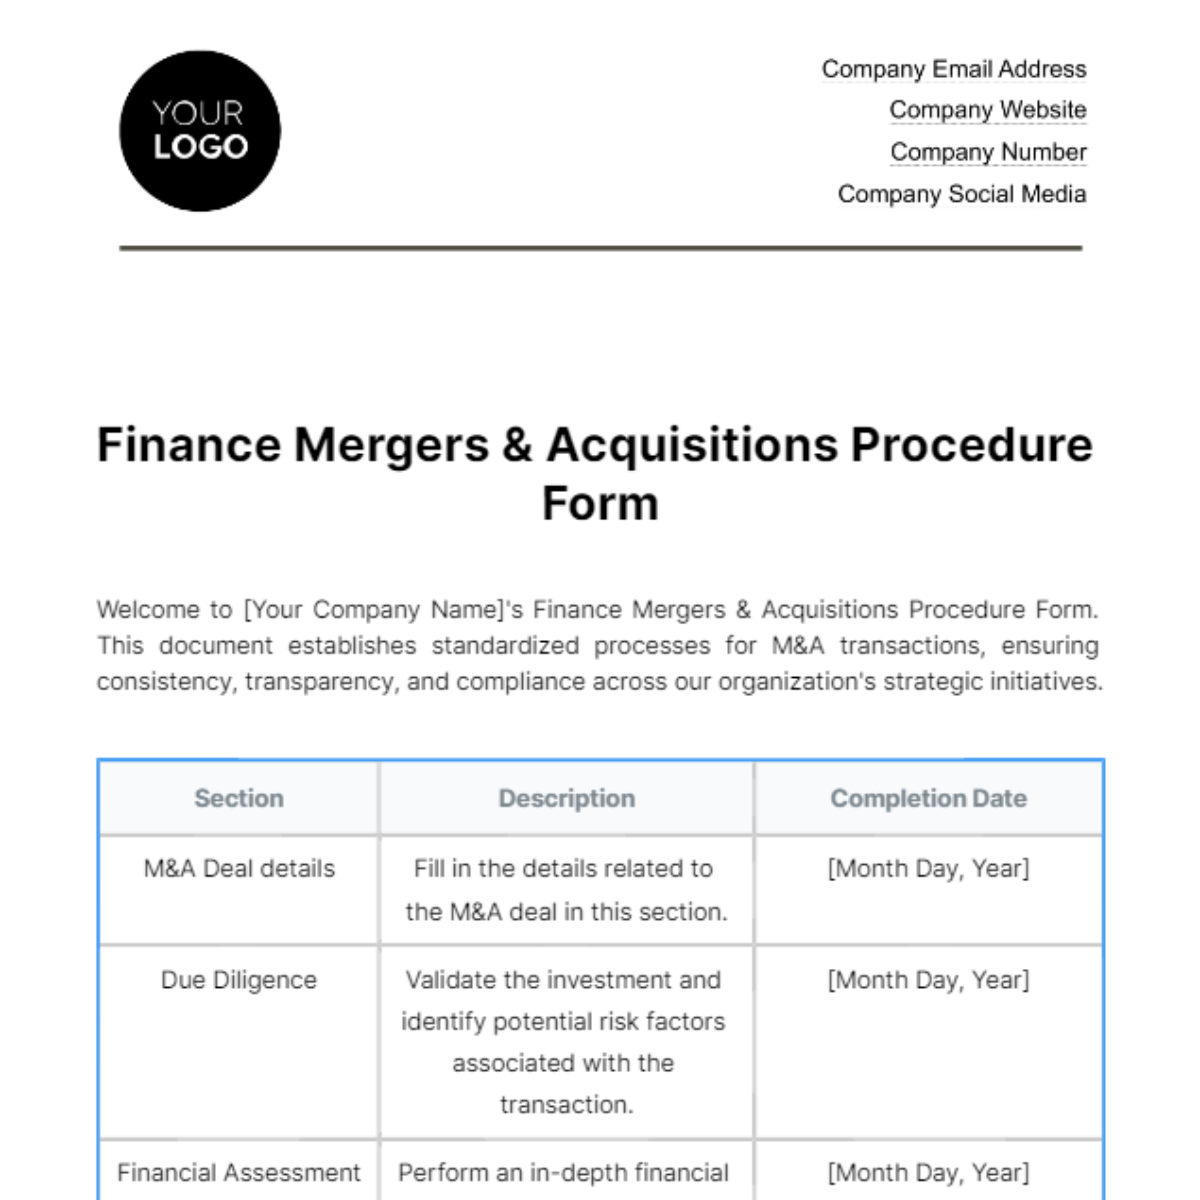 Free Finance Mergers & Acquisitions Procedure Form Template